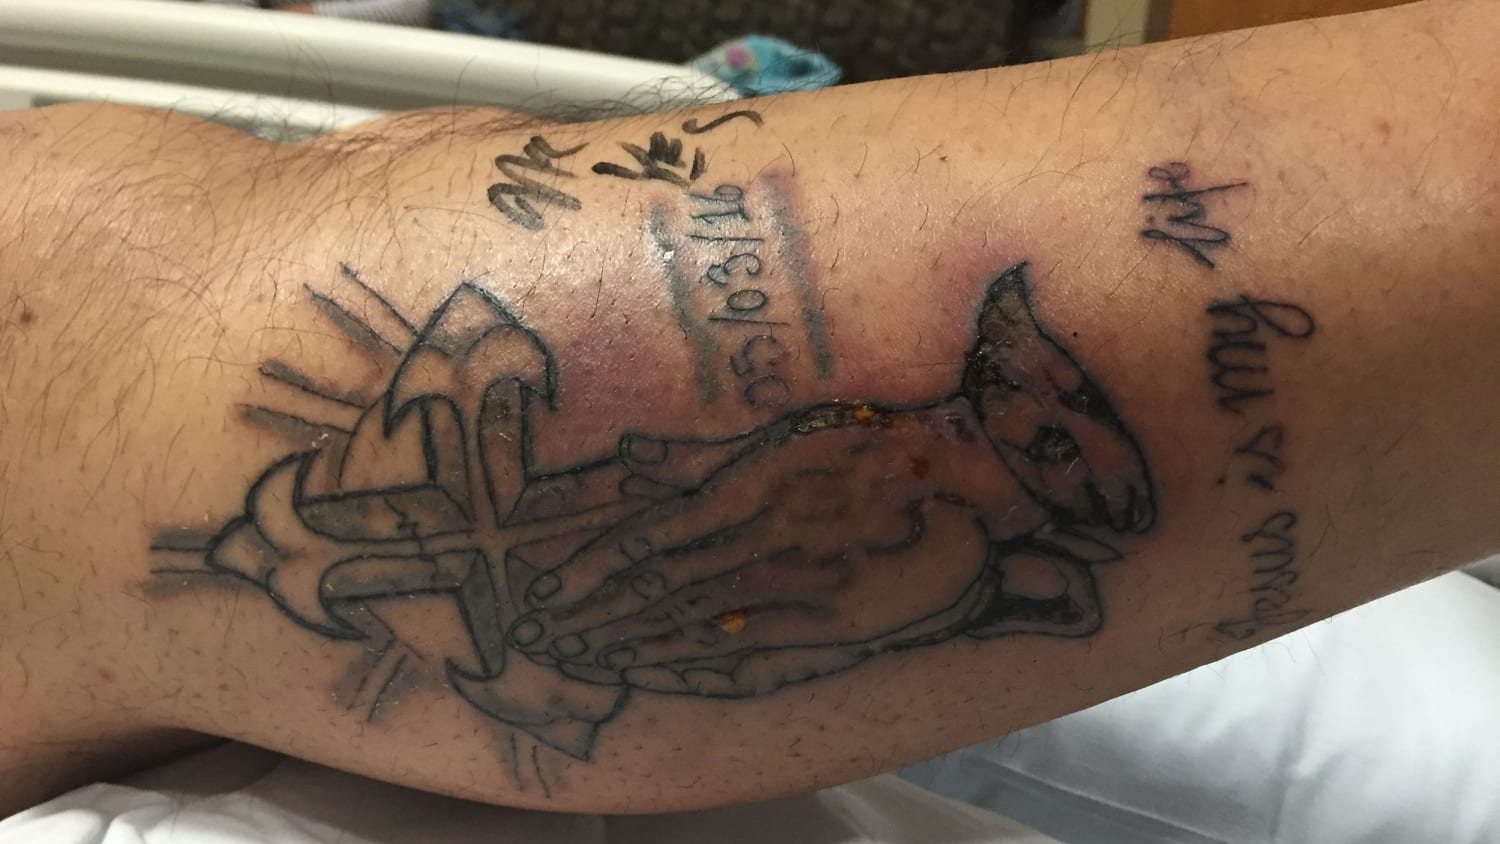 31-year-old man dies after swimming with fresh tattoo